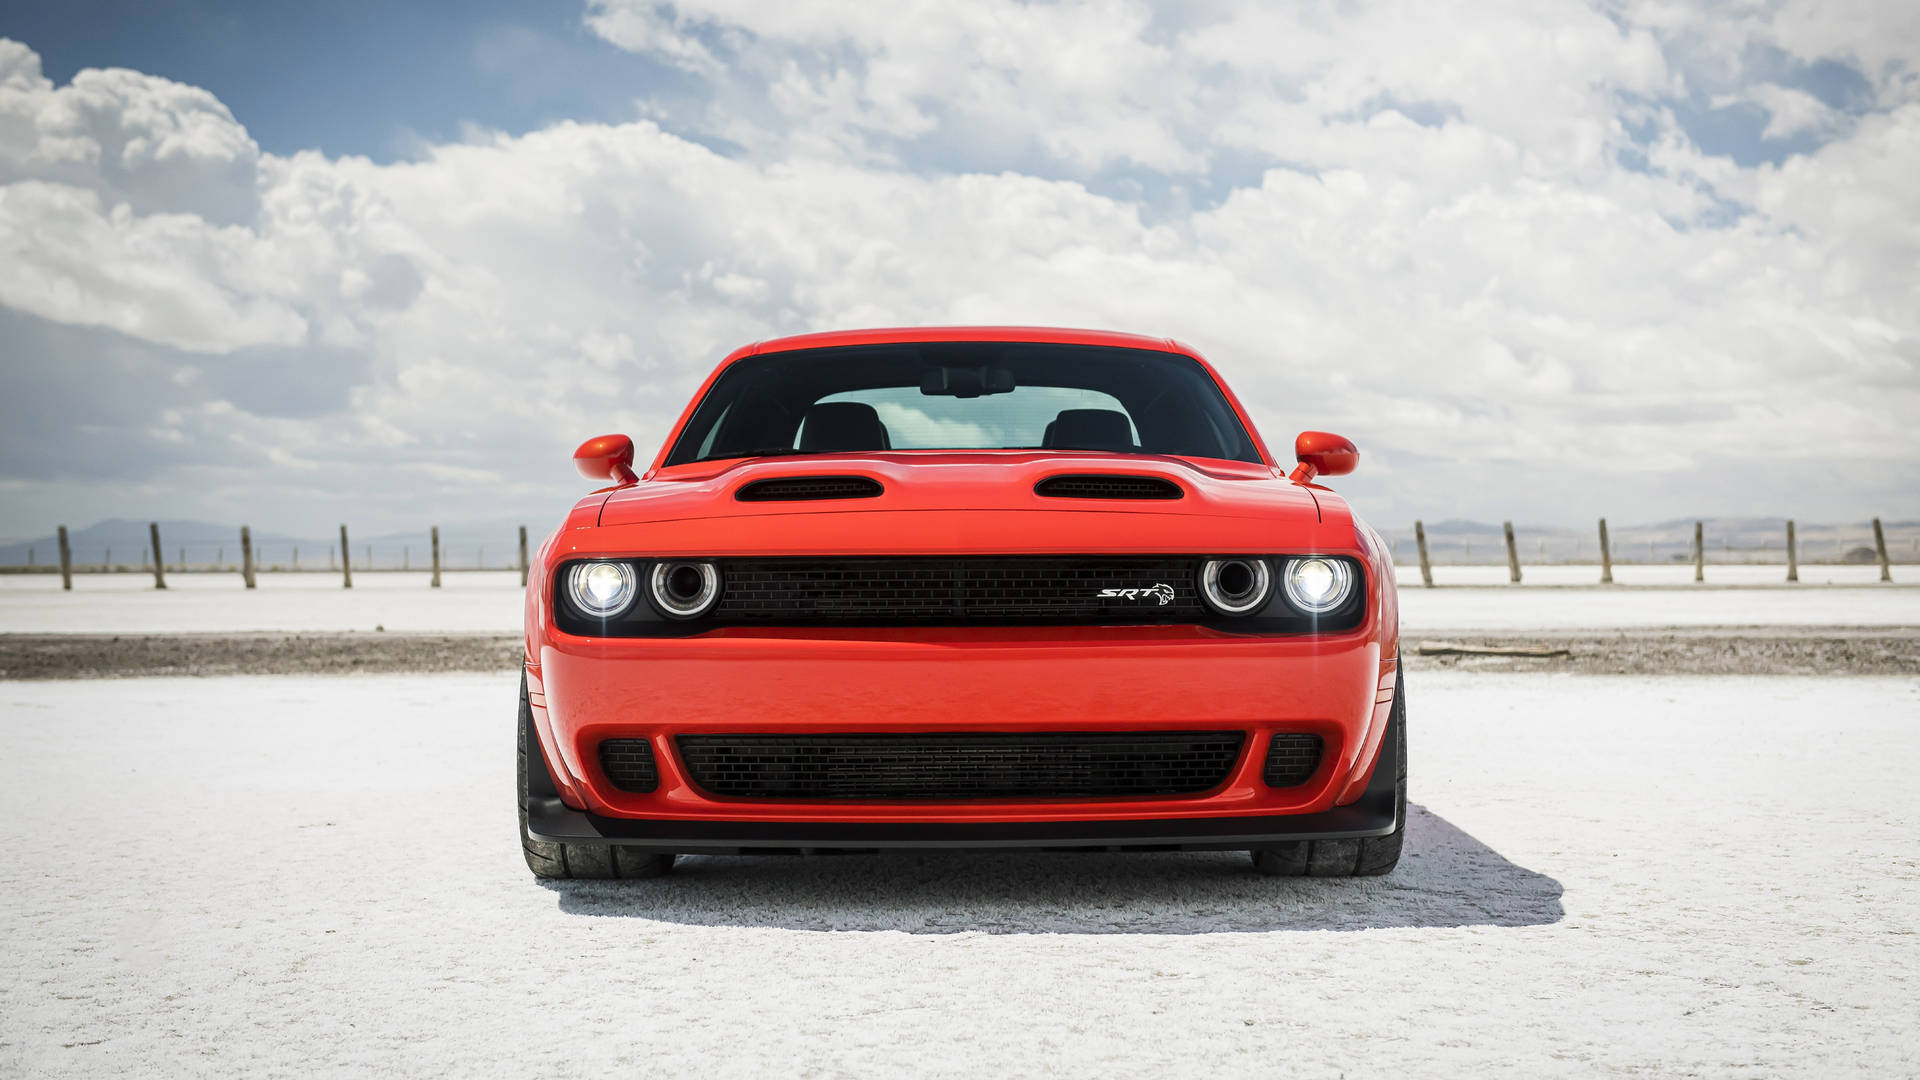 Power Unleashed - The Dodge Challenger: A true embodiment of muscle and style. Wallpaper